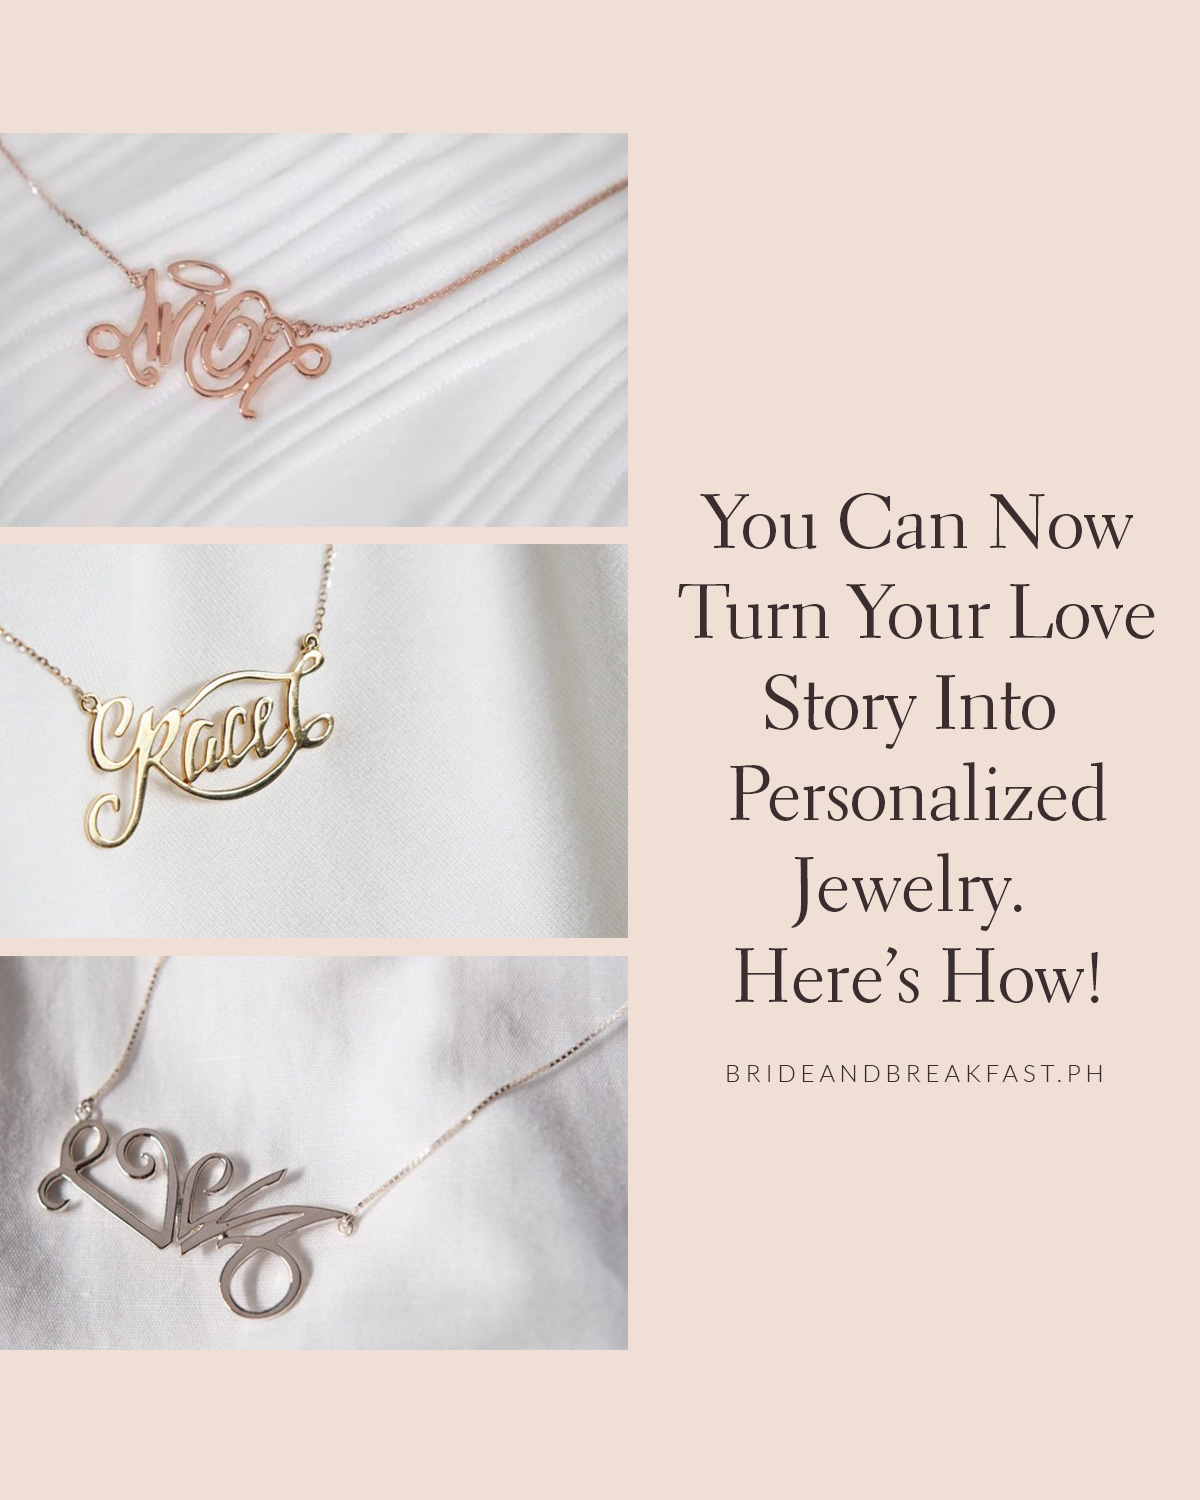 You Can Now Turn Your Love Story Into Personalized Jewelry. Here’s How!